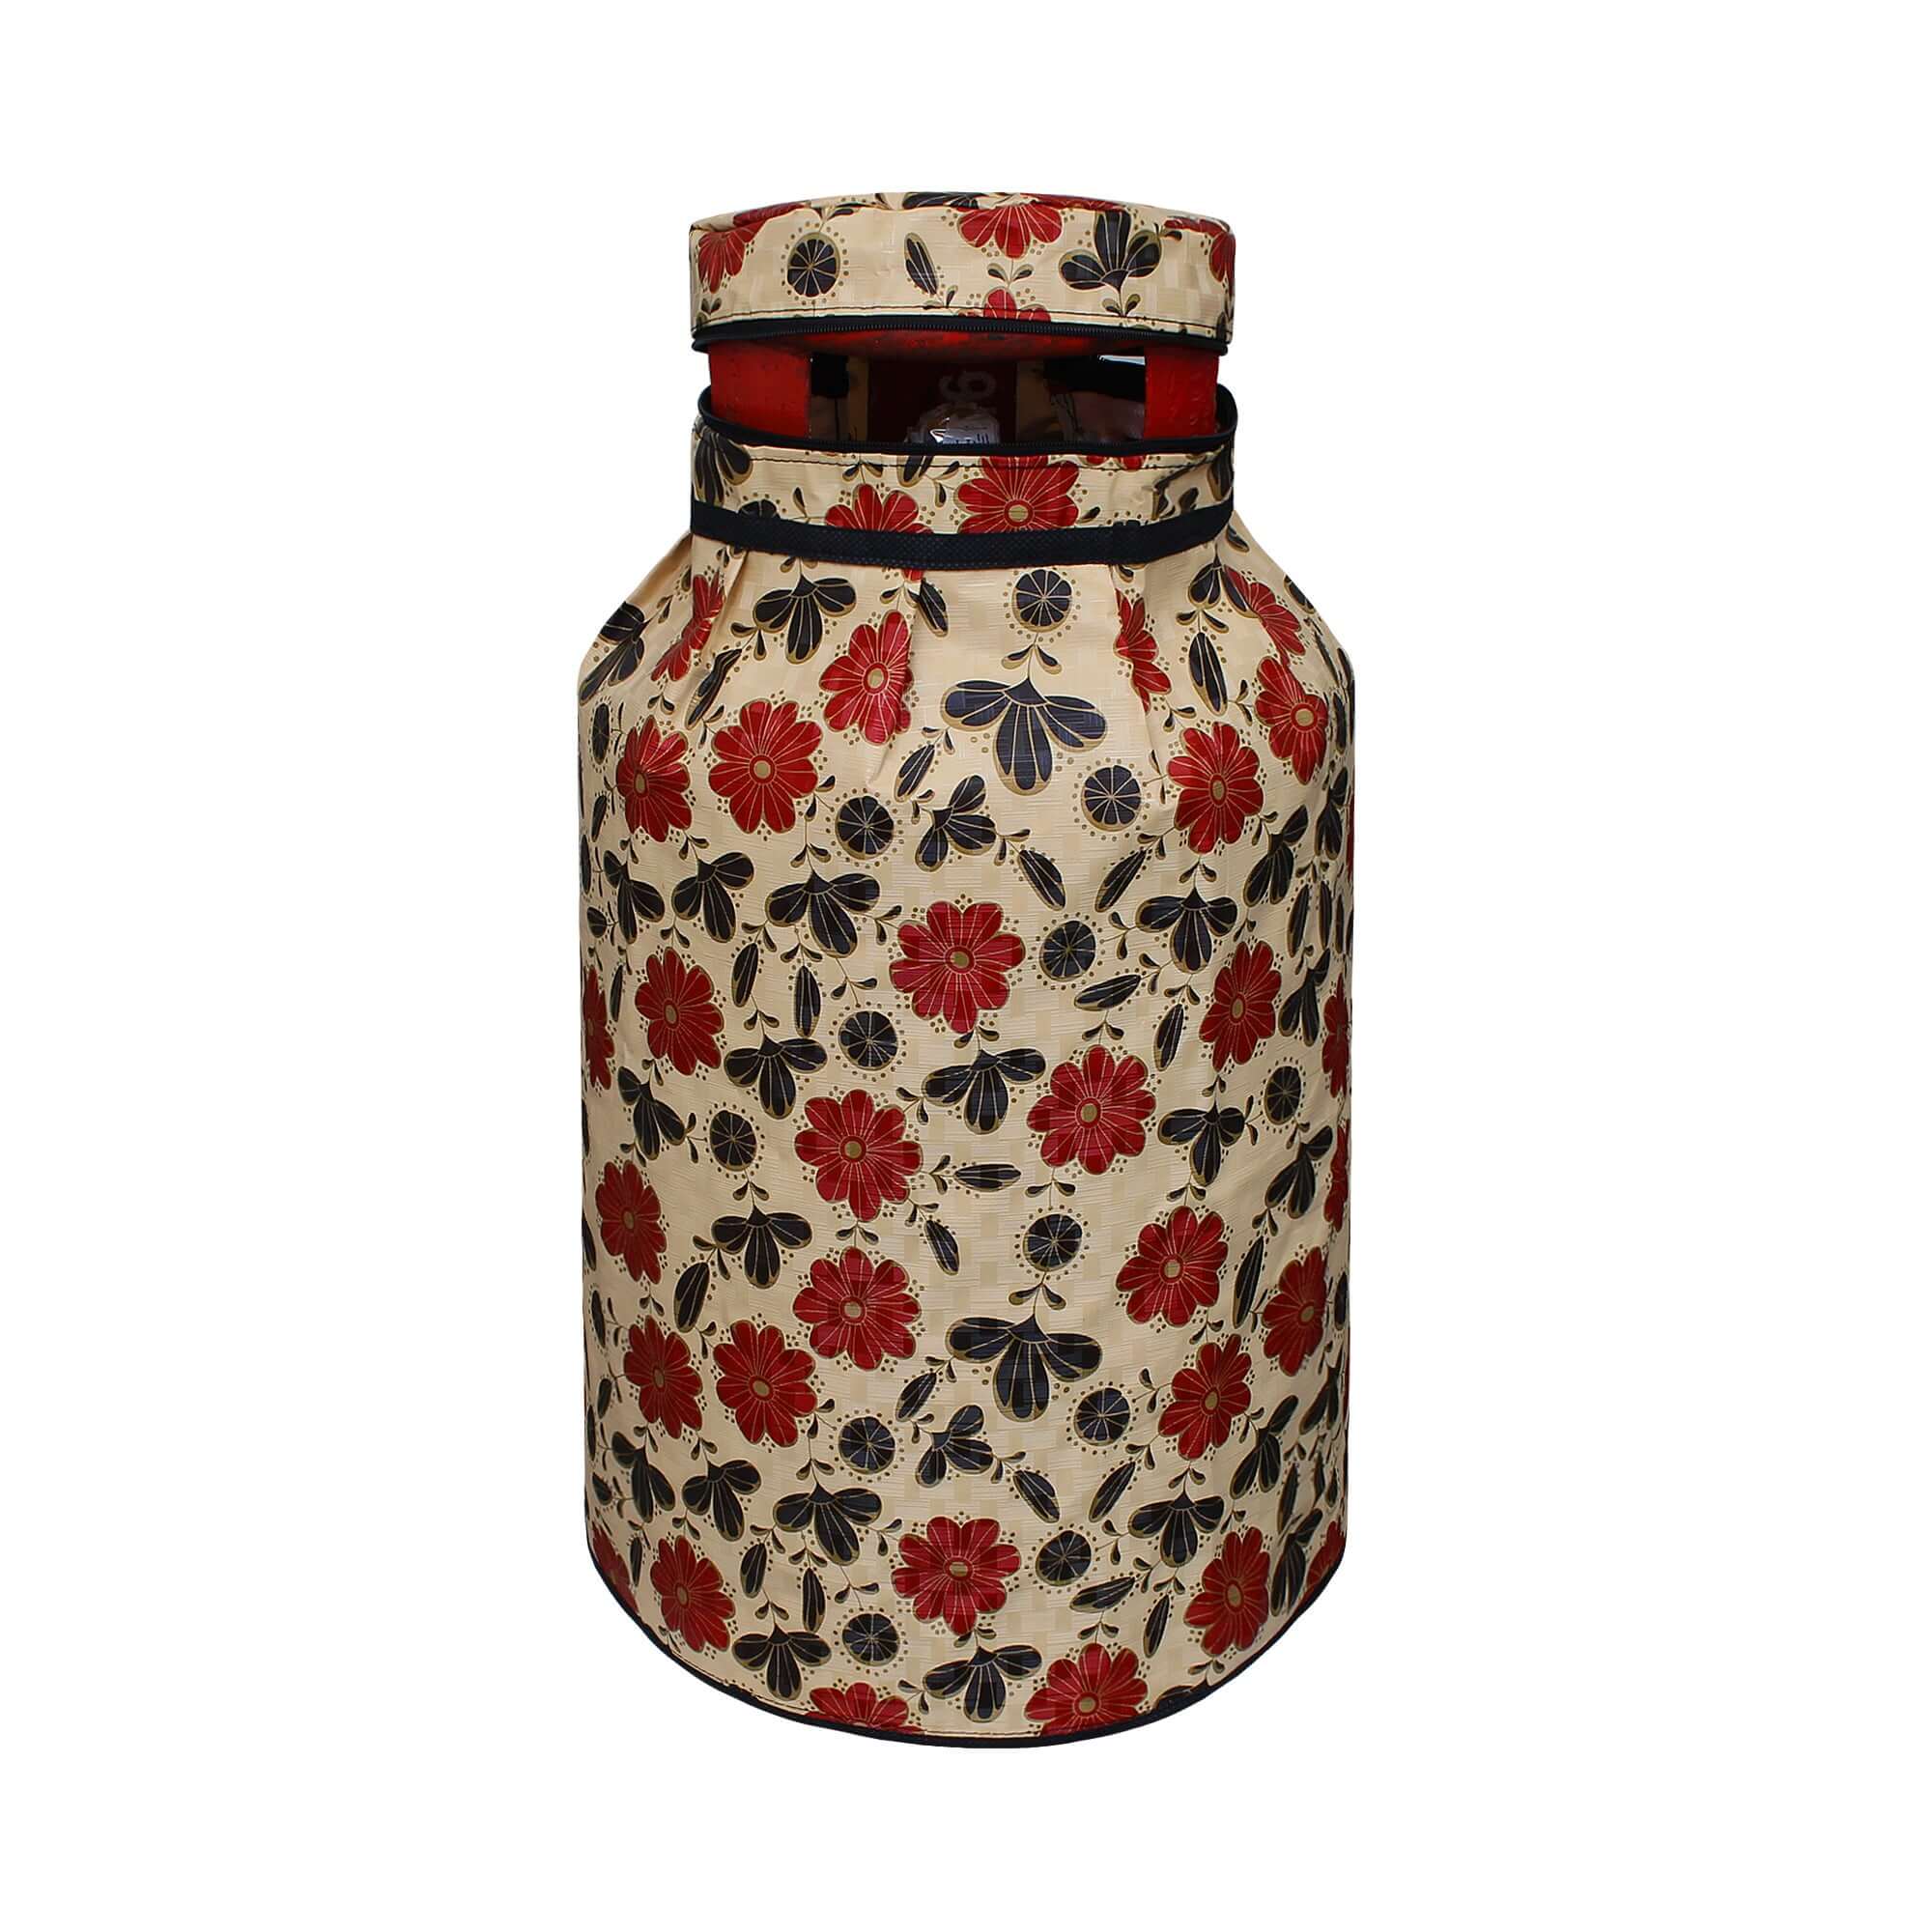 LPG Gas Cylinder Cover, SA50 - Dream Care Furnishings Private Limited